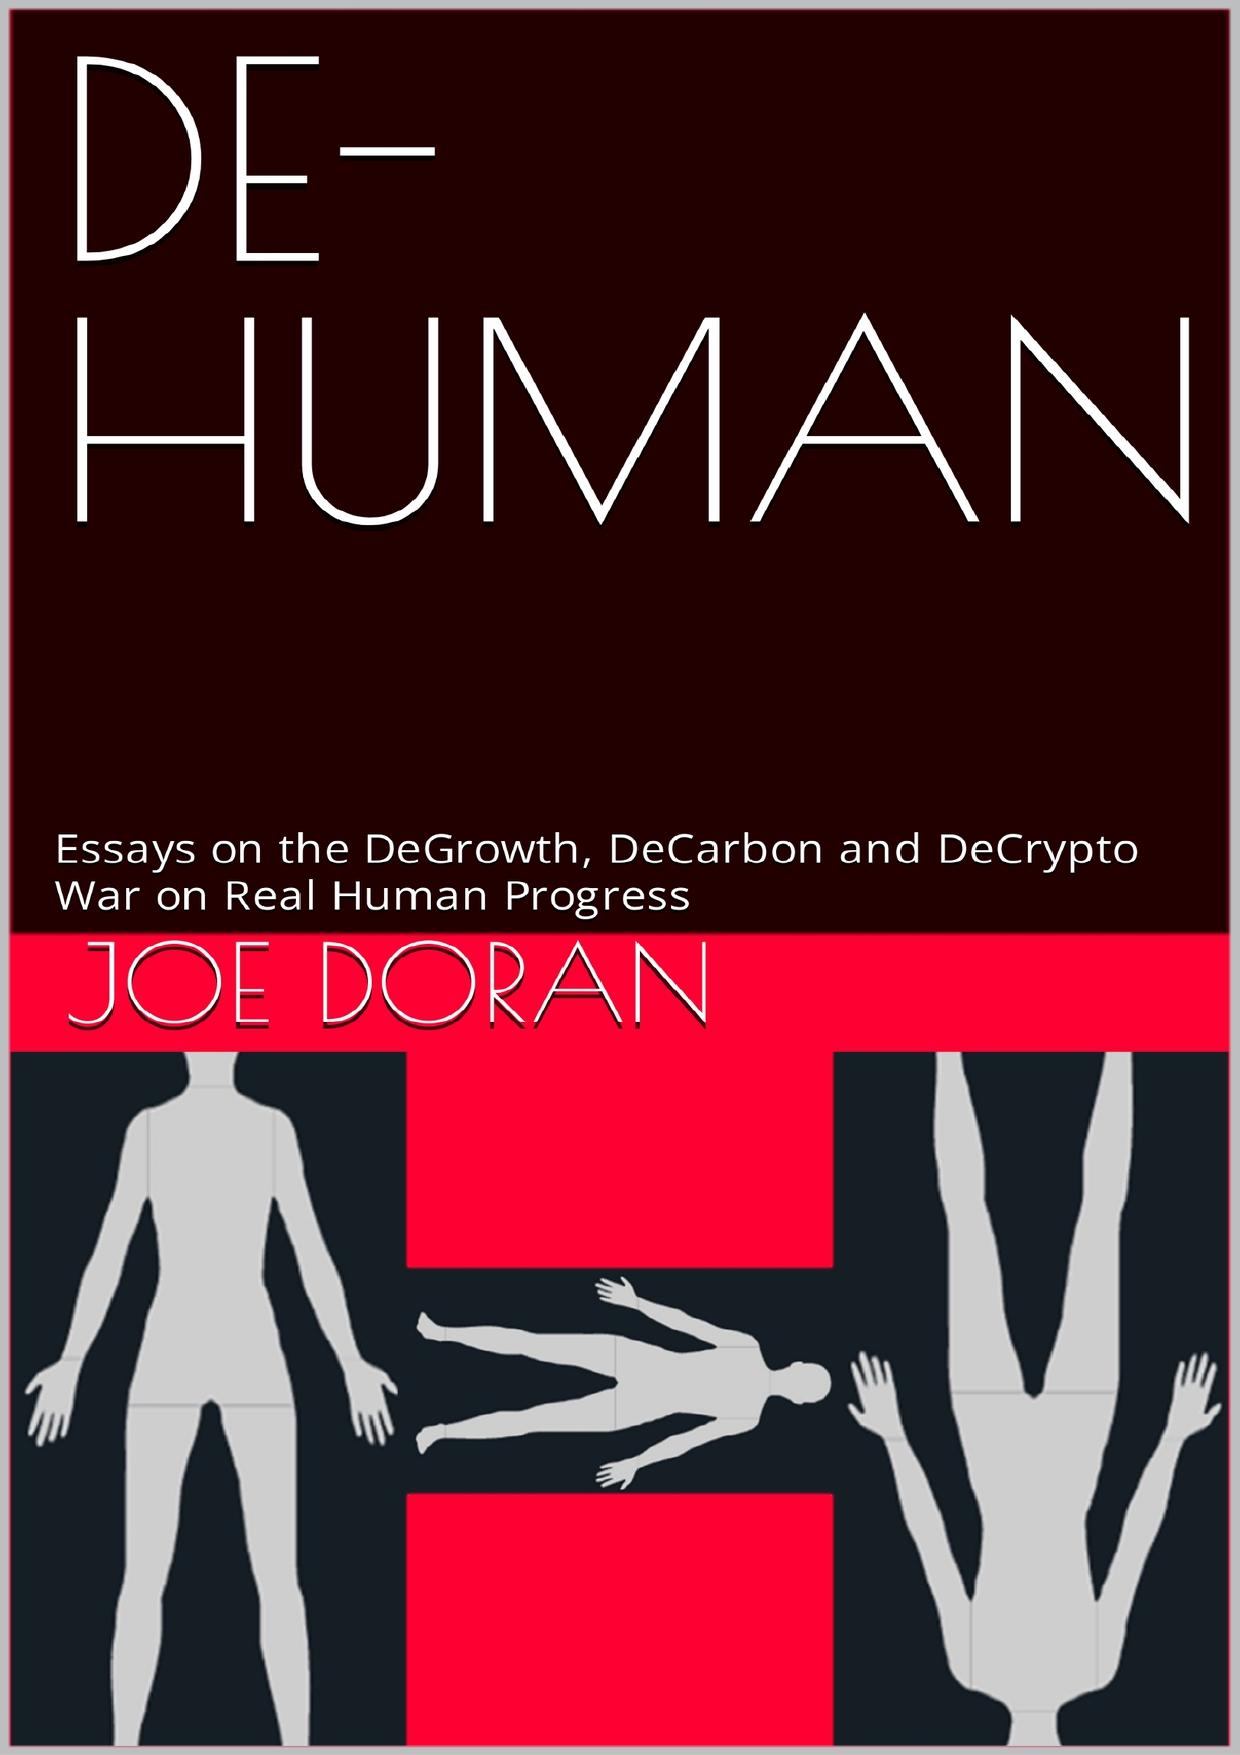 DE-HUMAN: Essays on the DeGrowth, DeCarbon and DeCrypto War on Real Human Progress